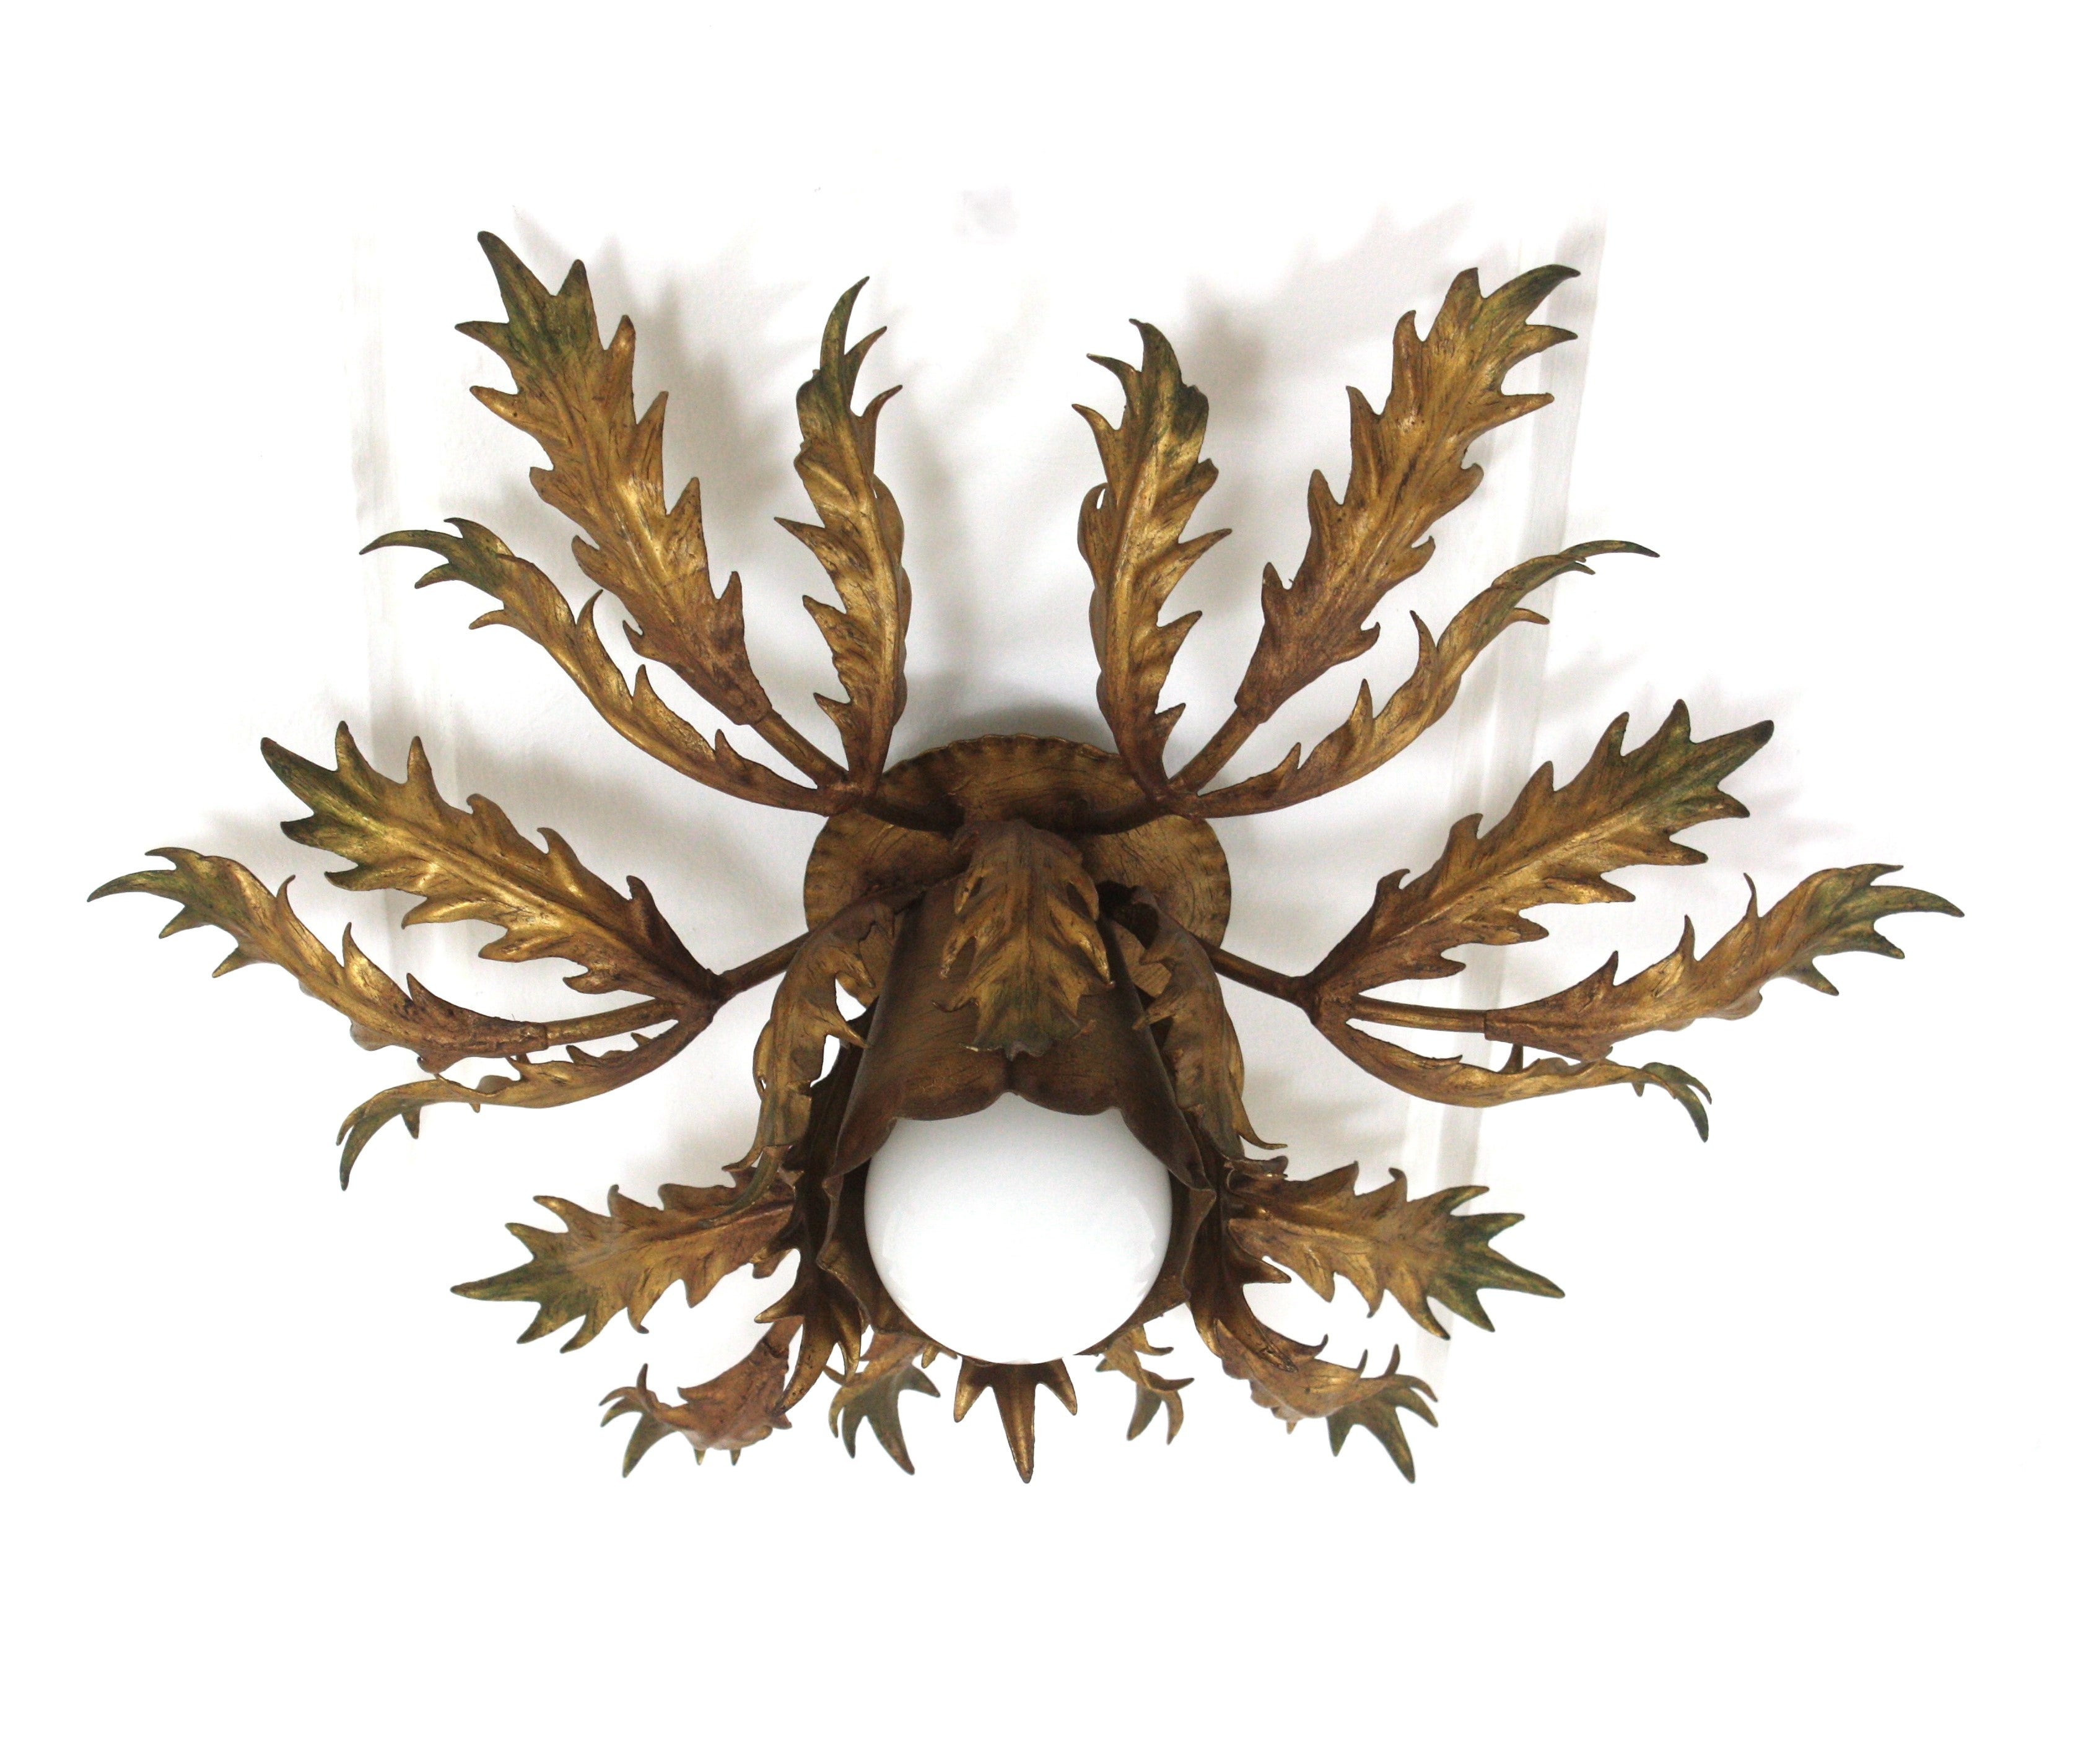 Gilt Iron Leafed Sunburst Light Fixture
Stunning foliage sunburst ceiling light fixture, gilt iron, gold leaf, Spain, 1950s.
This eye-catching iron ceiling lamp features a double layered leafed frame of leaves surrounding a central exposed bulb.